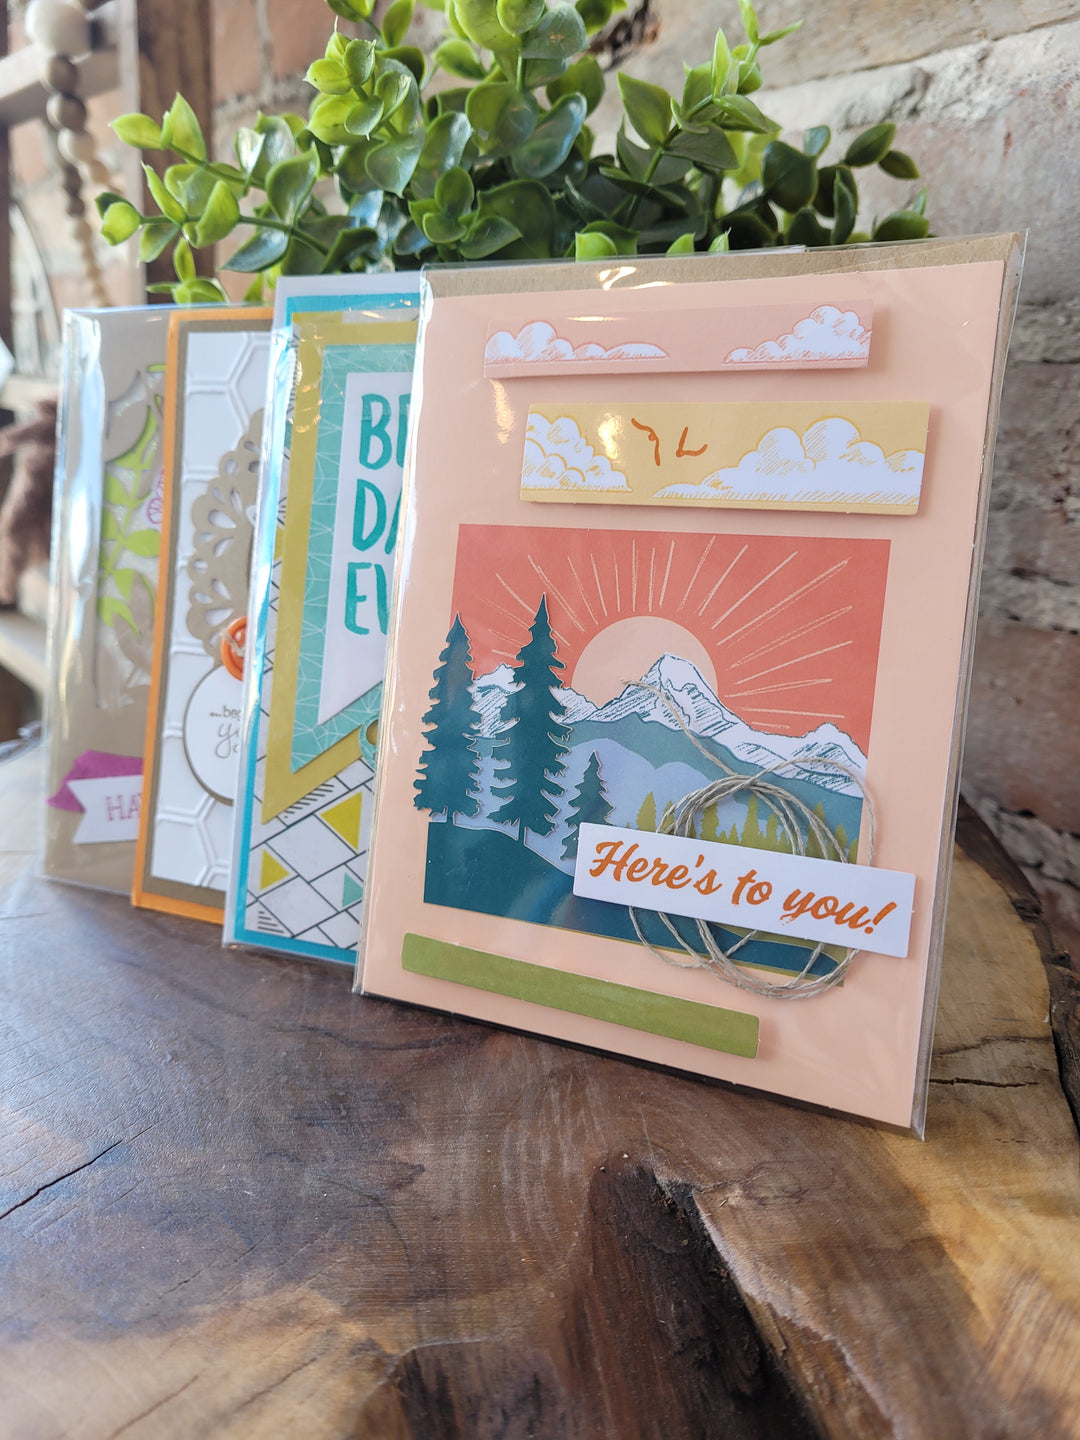 Cards By Sue, Crafted Greeting Cards- Friendship & Congratulations